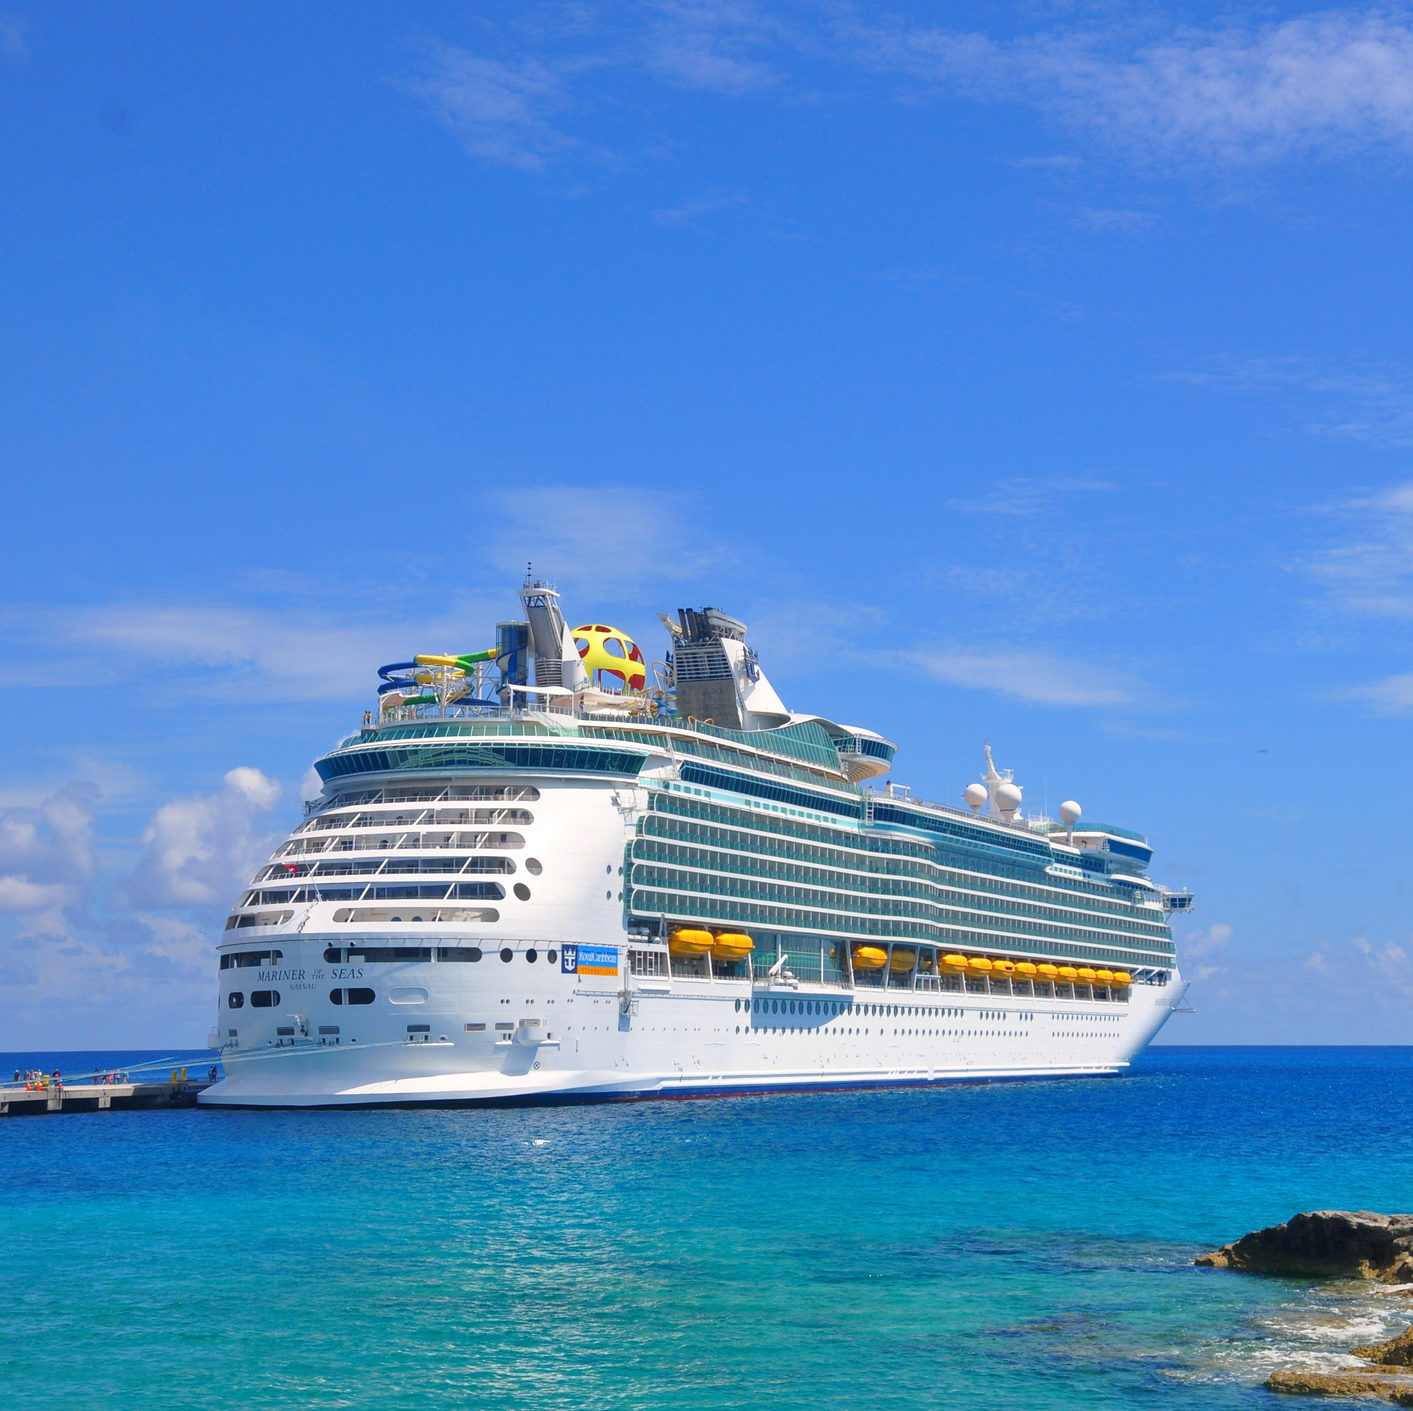 7-night Royal Caribbean cruises from $308 + save 60% on 2nd guest